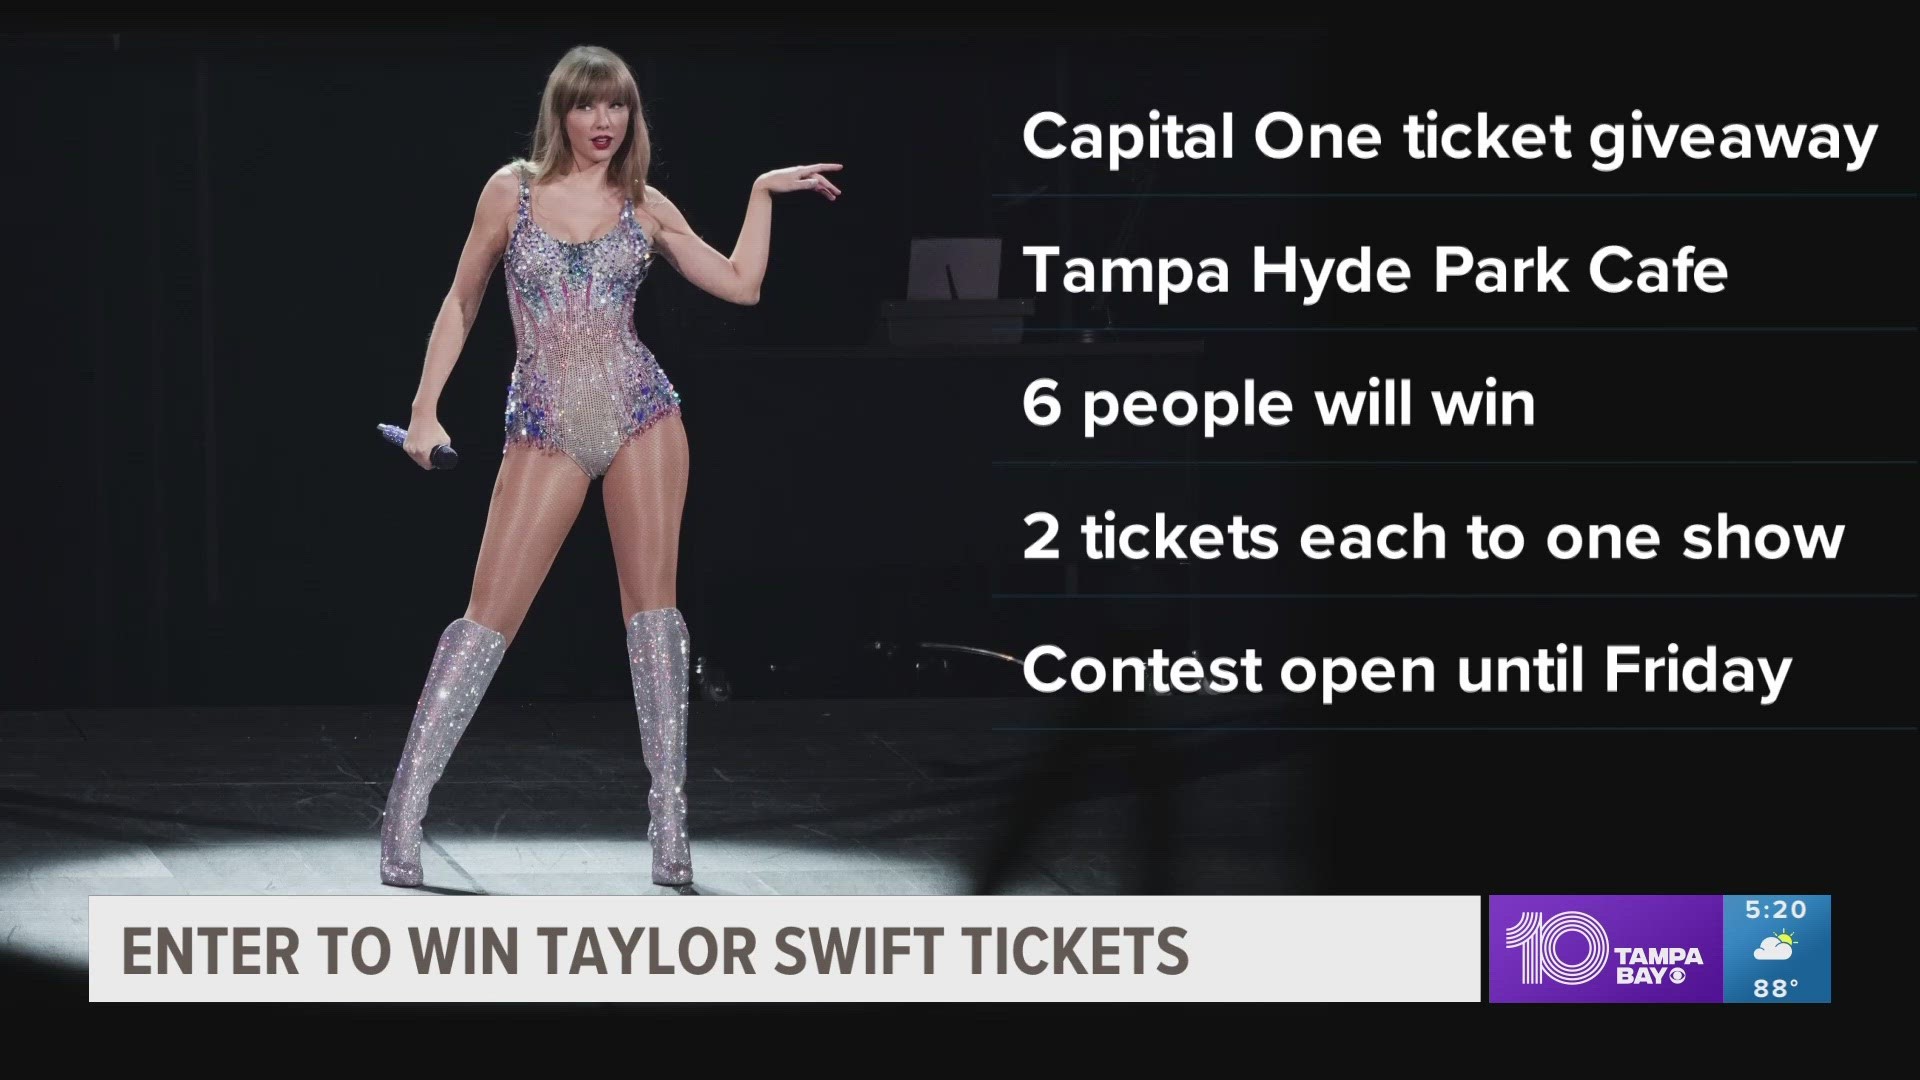 Taylor Swift fans in Tampa can enter to win 'The Eras Tour' tickets